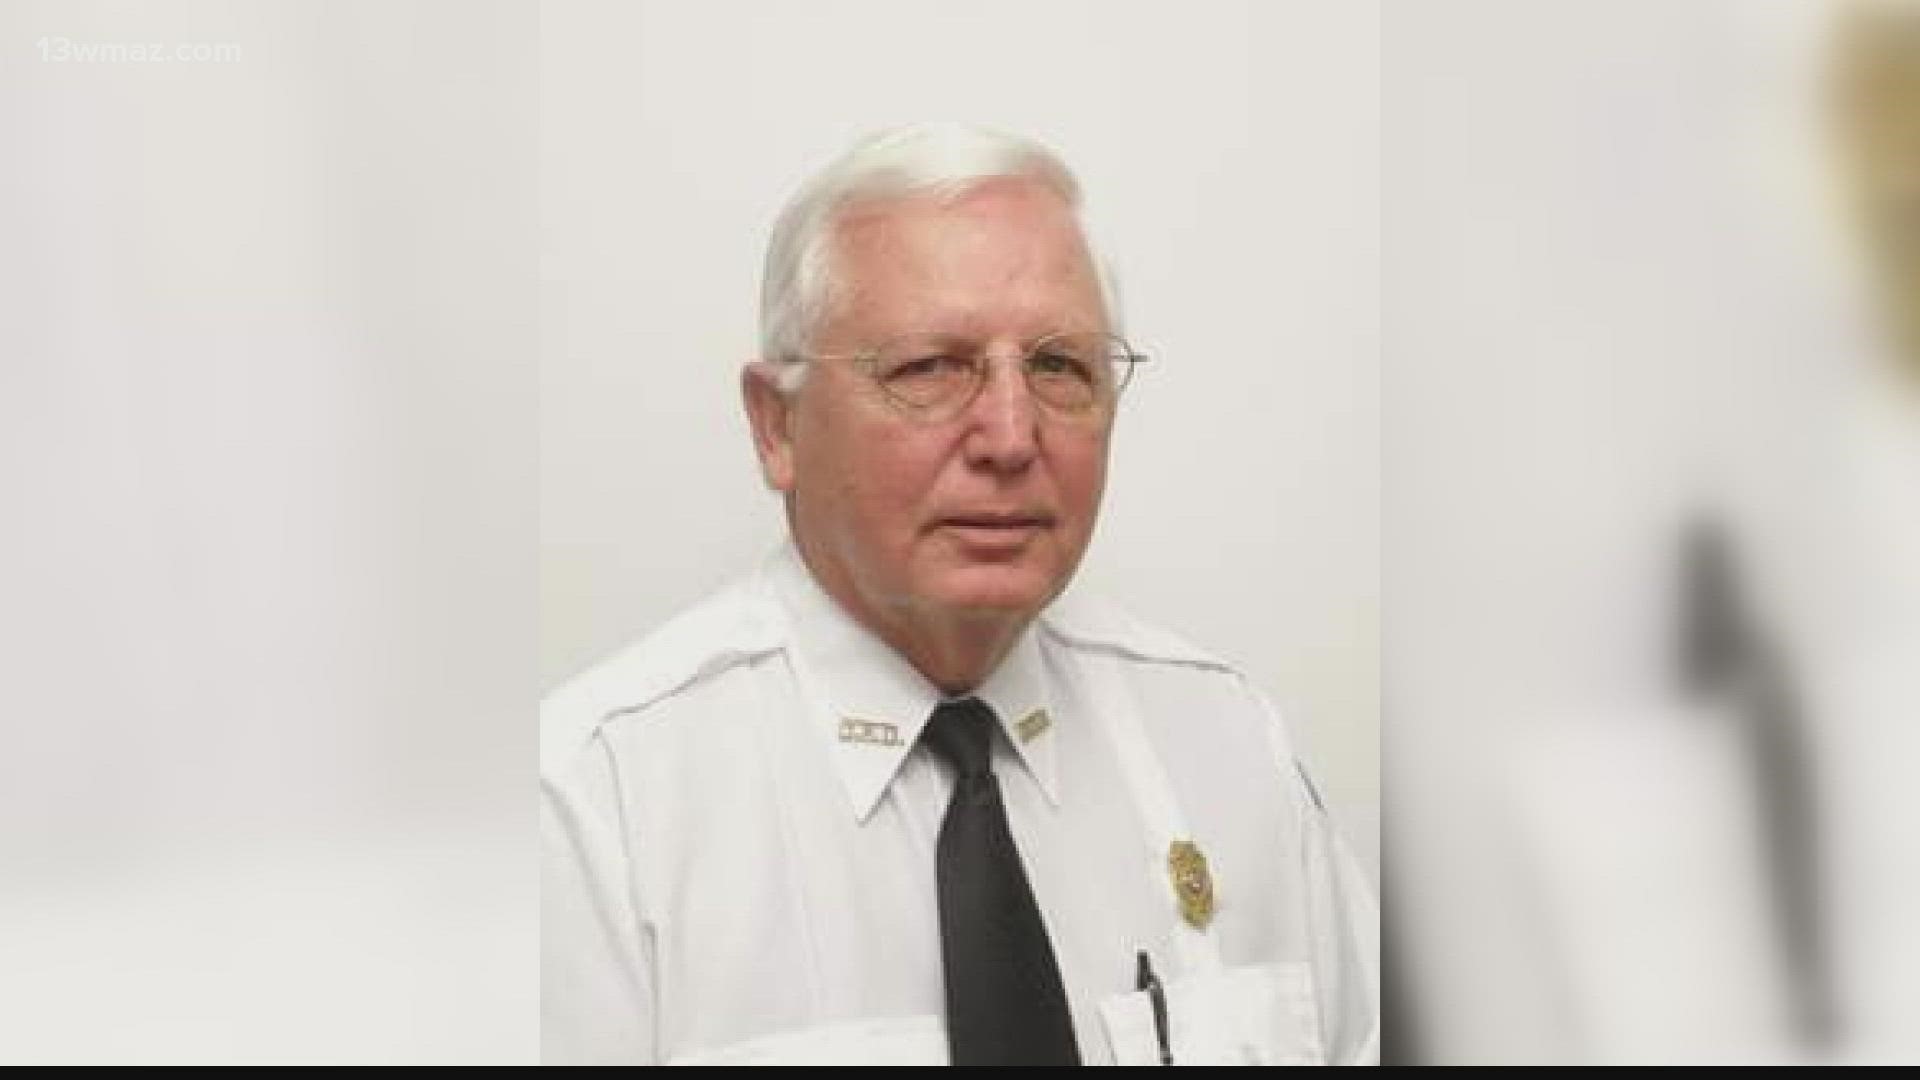 Robert Drew served the fire department for 53 years; 36 of them as fire chief.